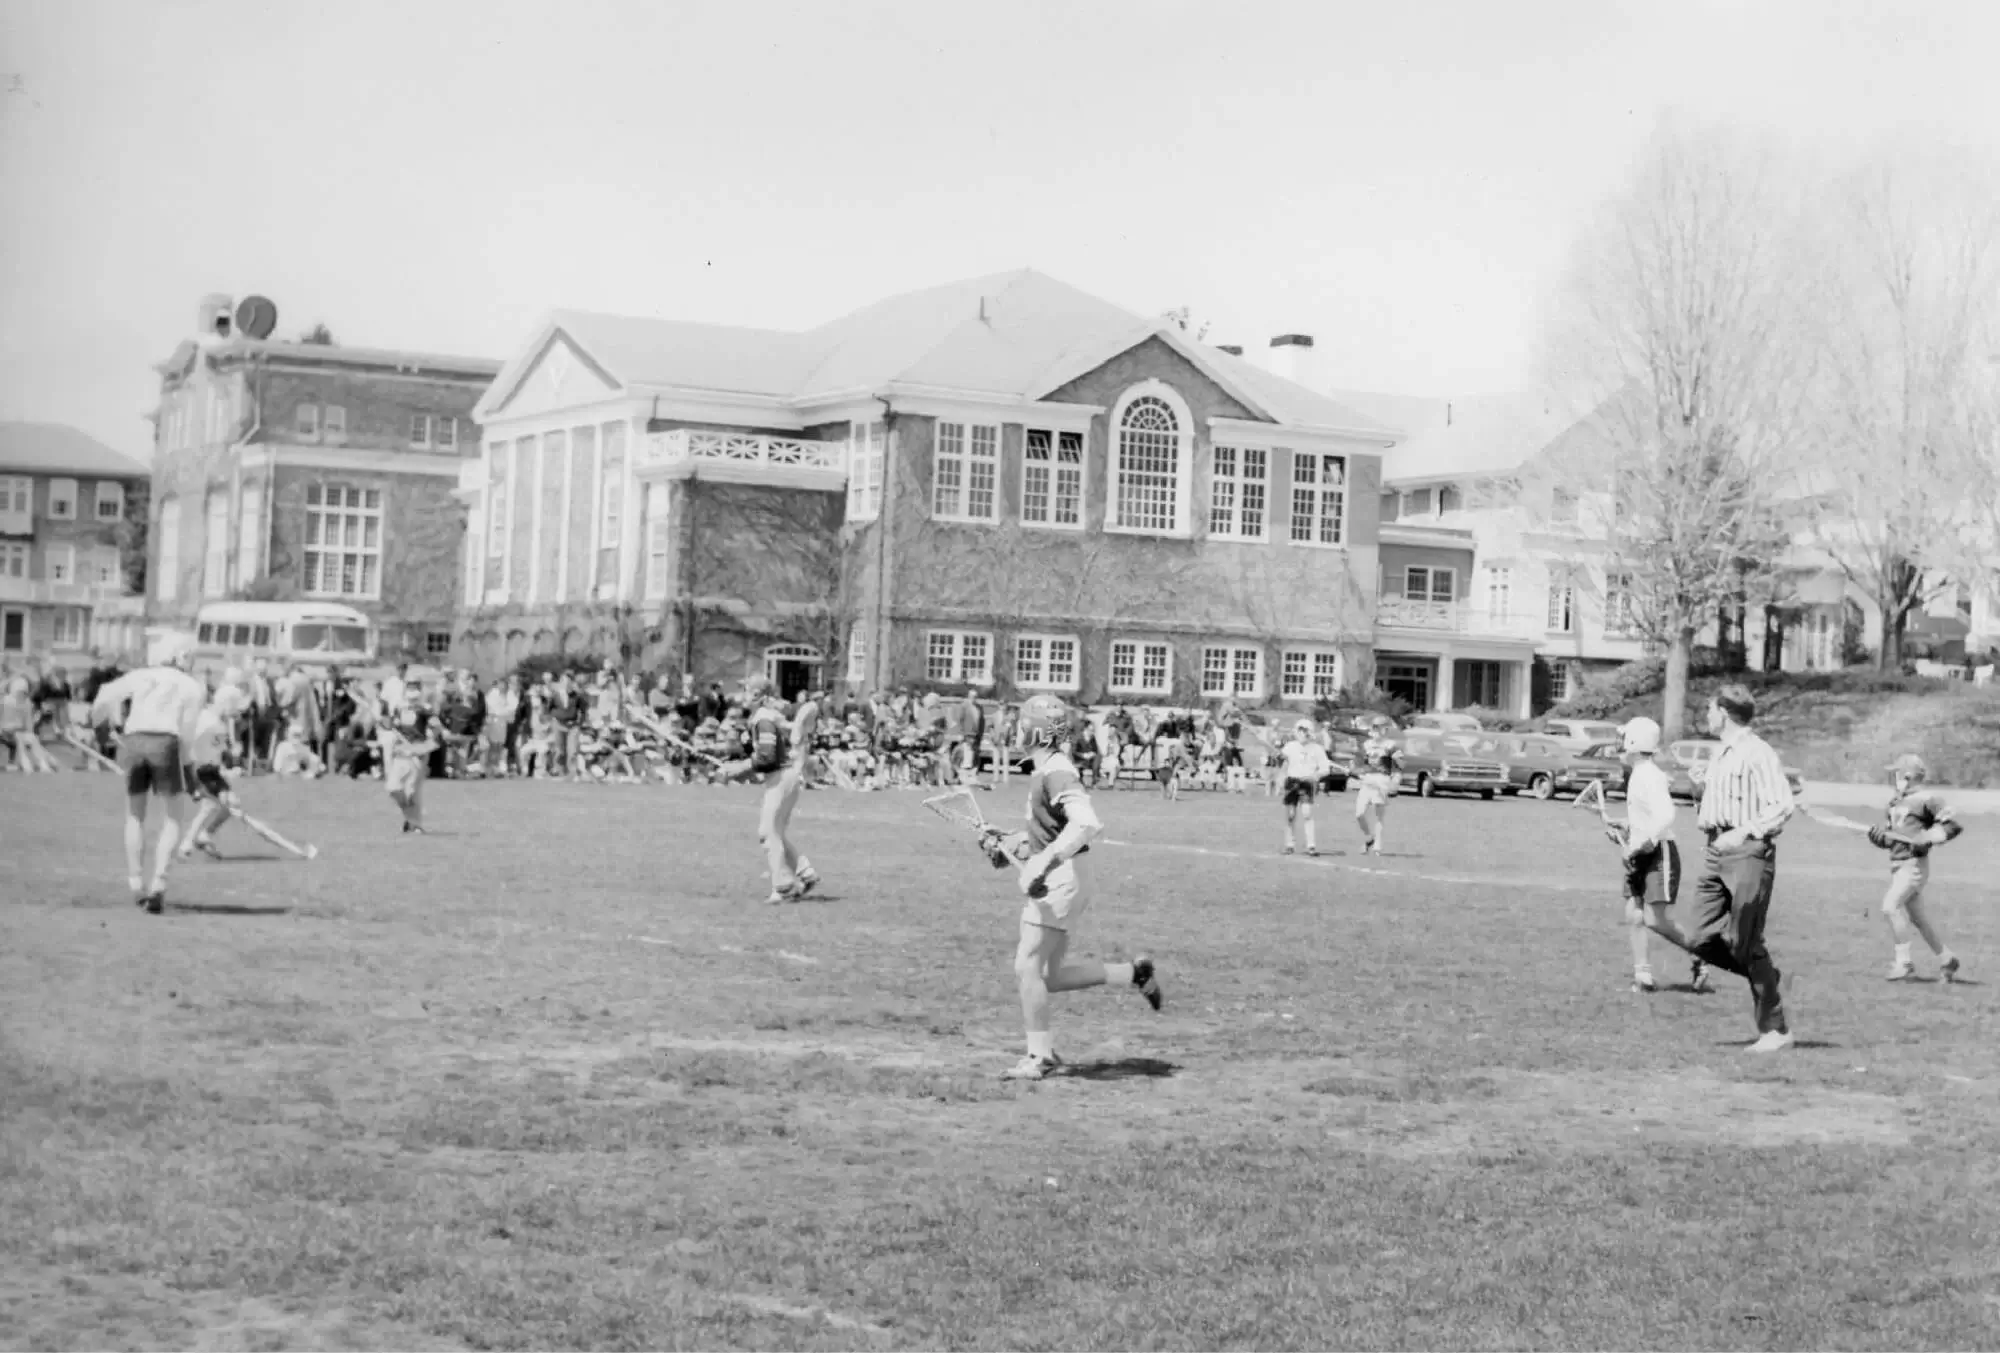 Vintage photo of boys playing lacrosse